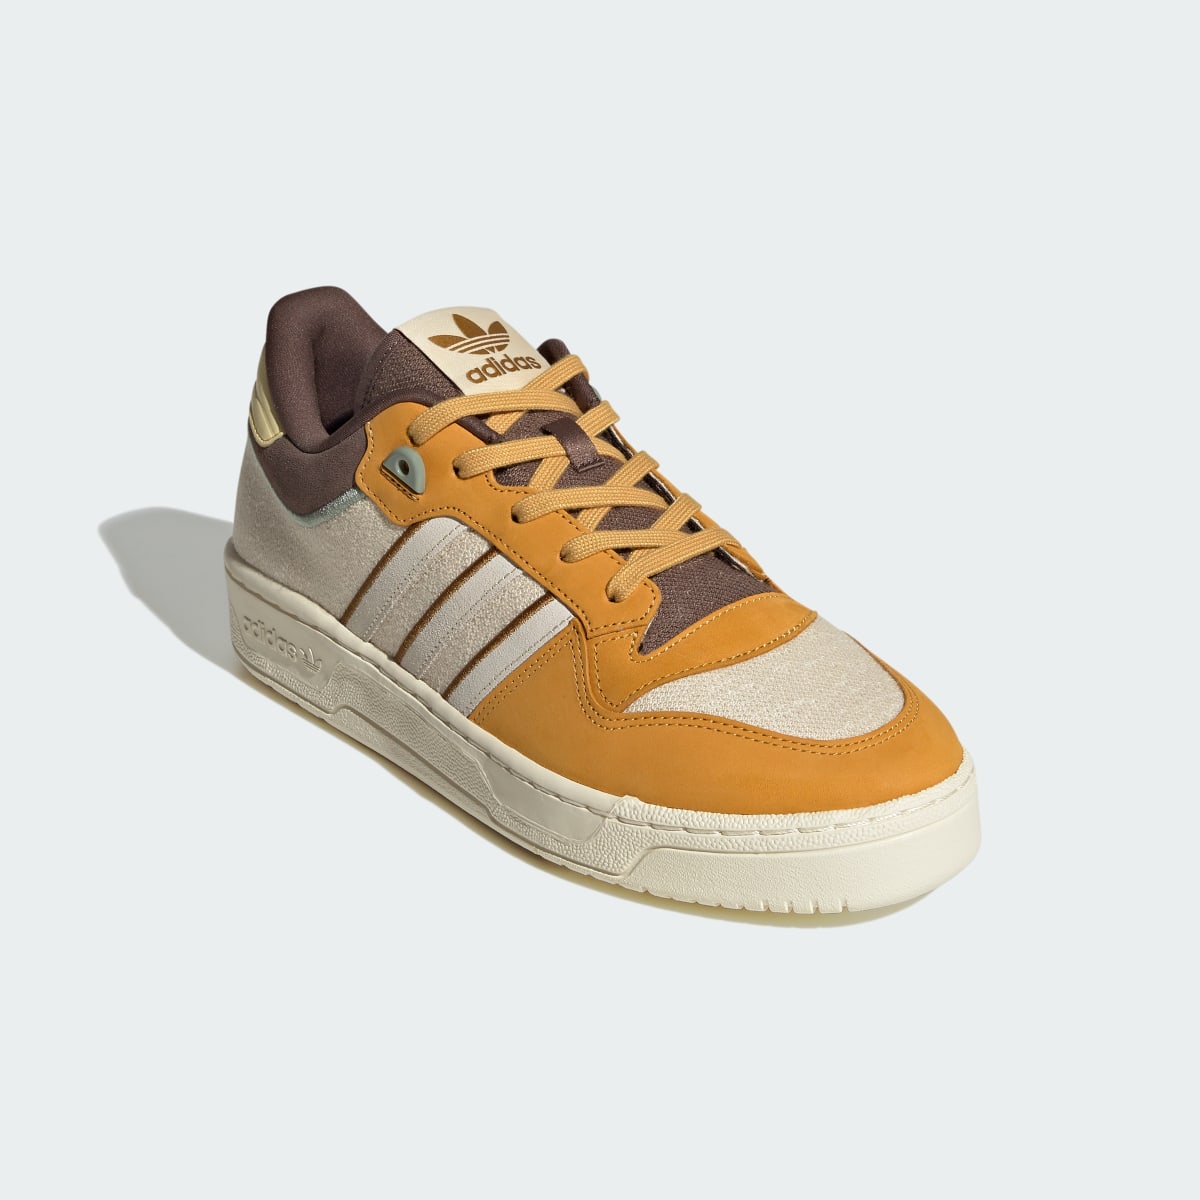 Adidas Rivalry Low 86 Basketball Shoes. 5